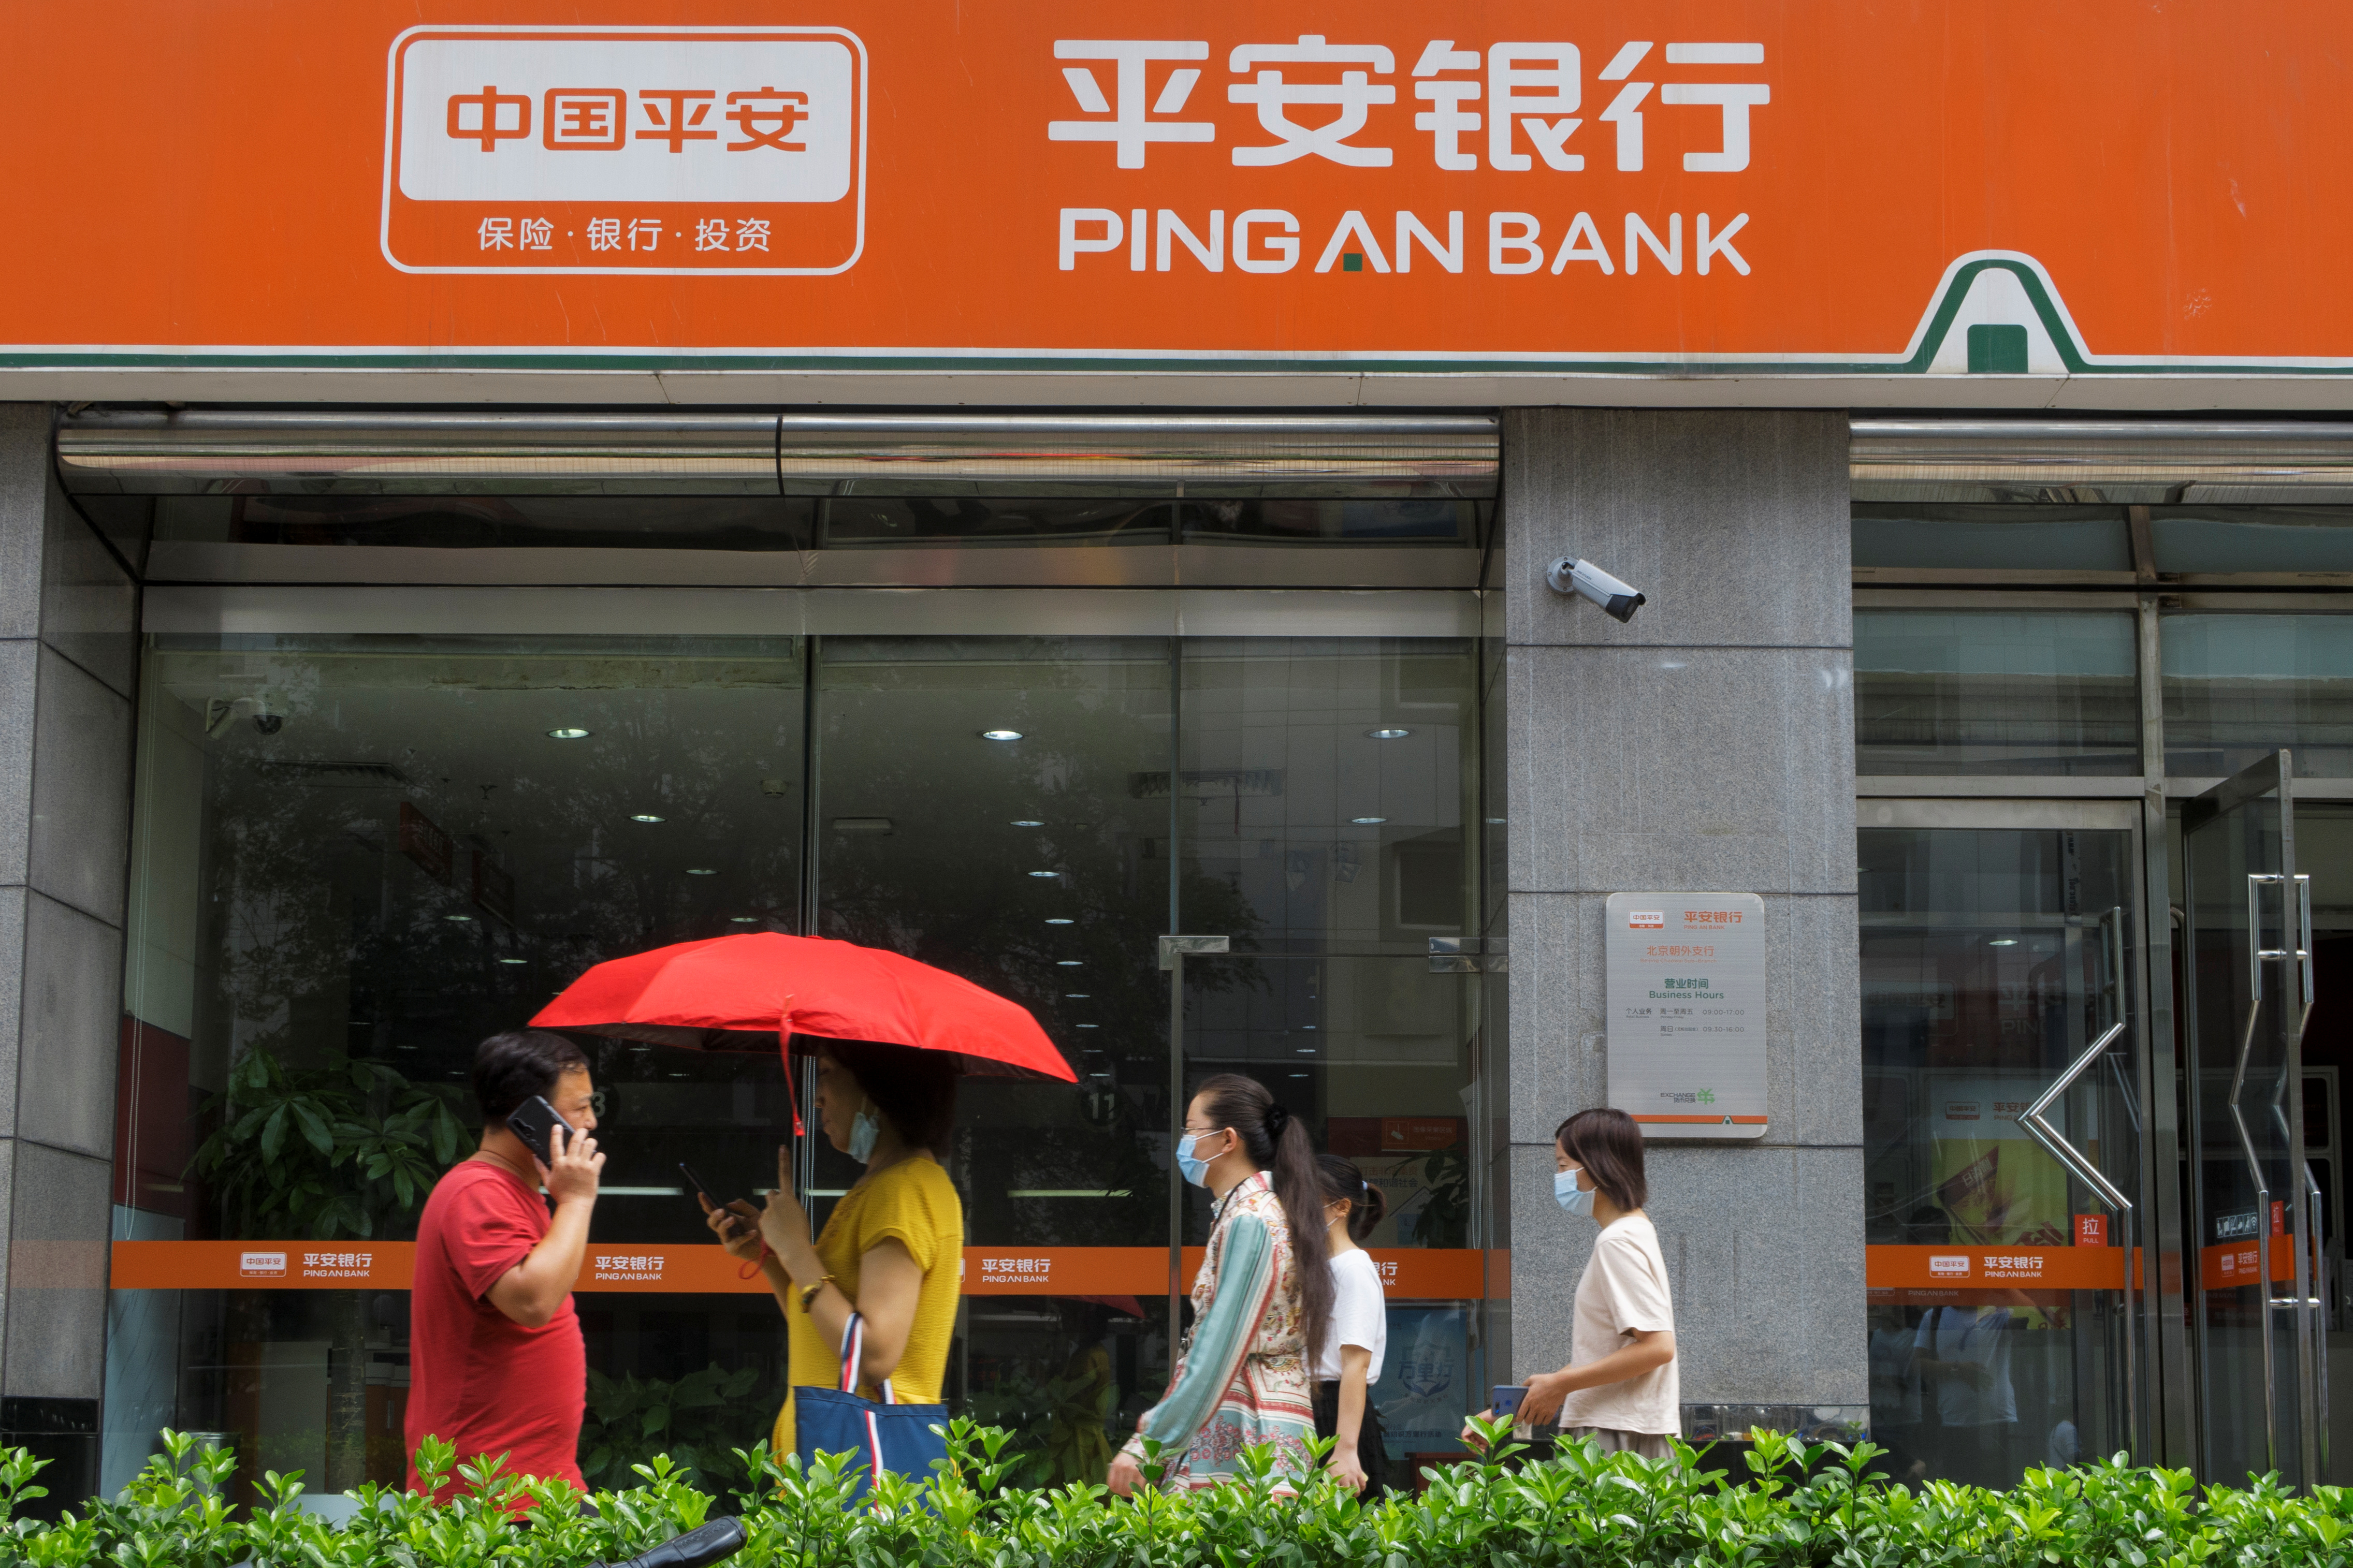 People walk past a branch of Ping An Bank, a subsidiary of Ping An Insurance, in Beijing